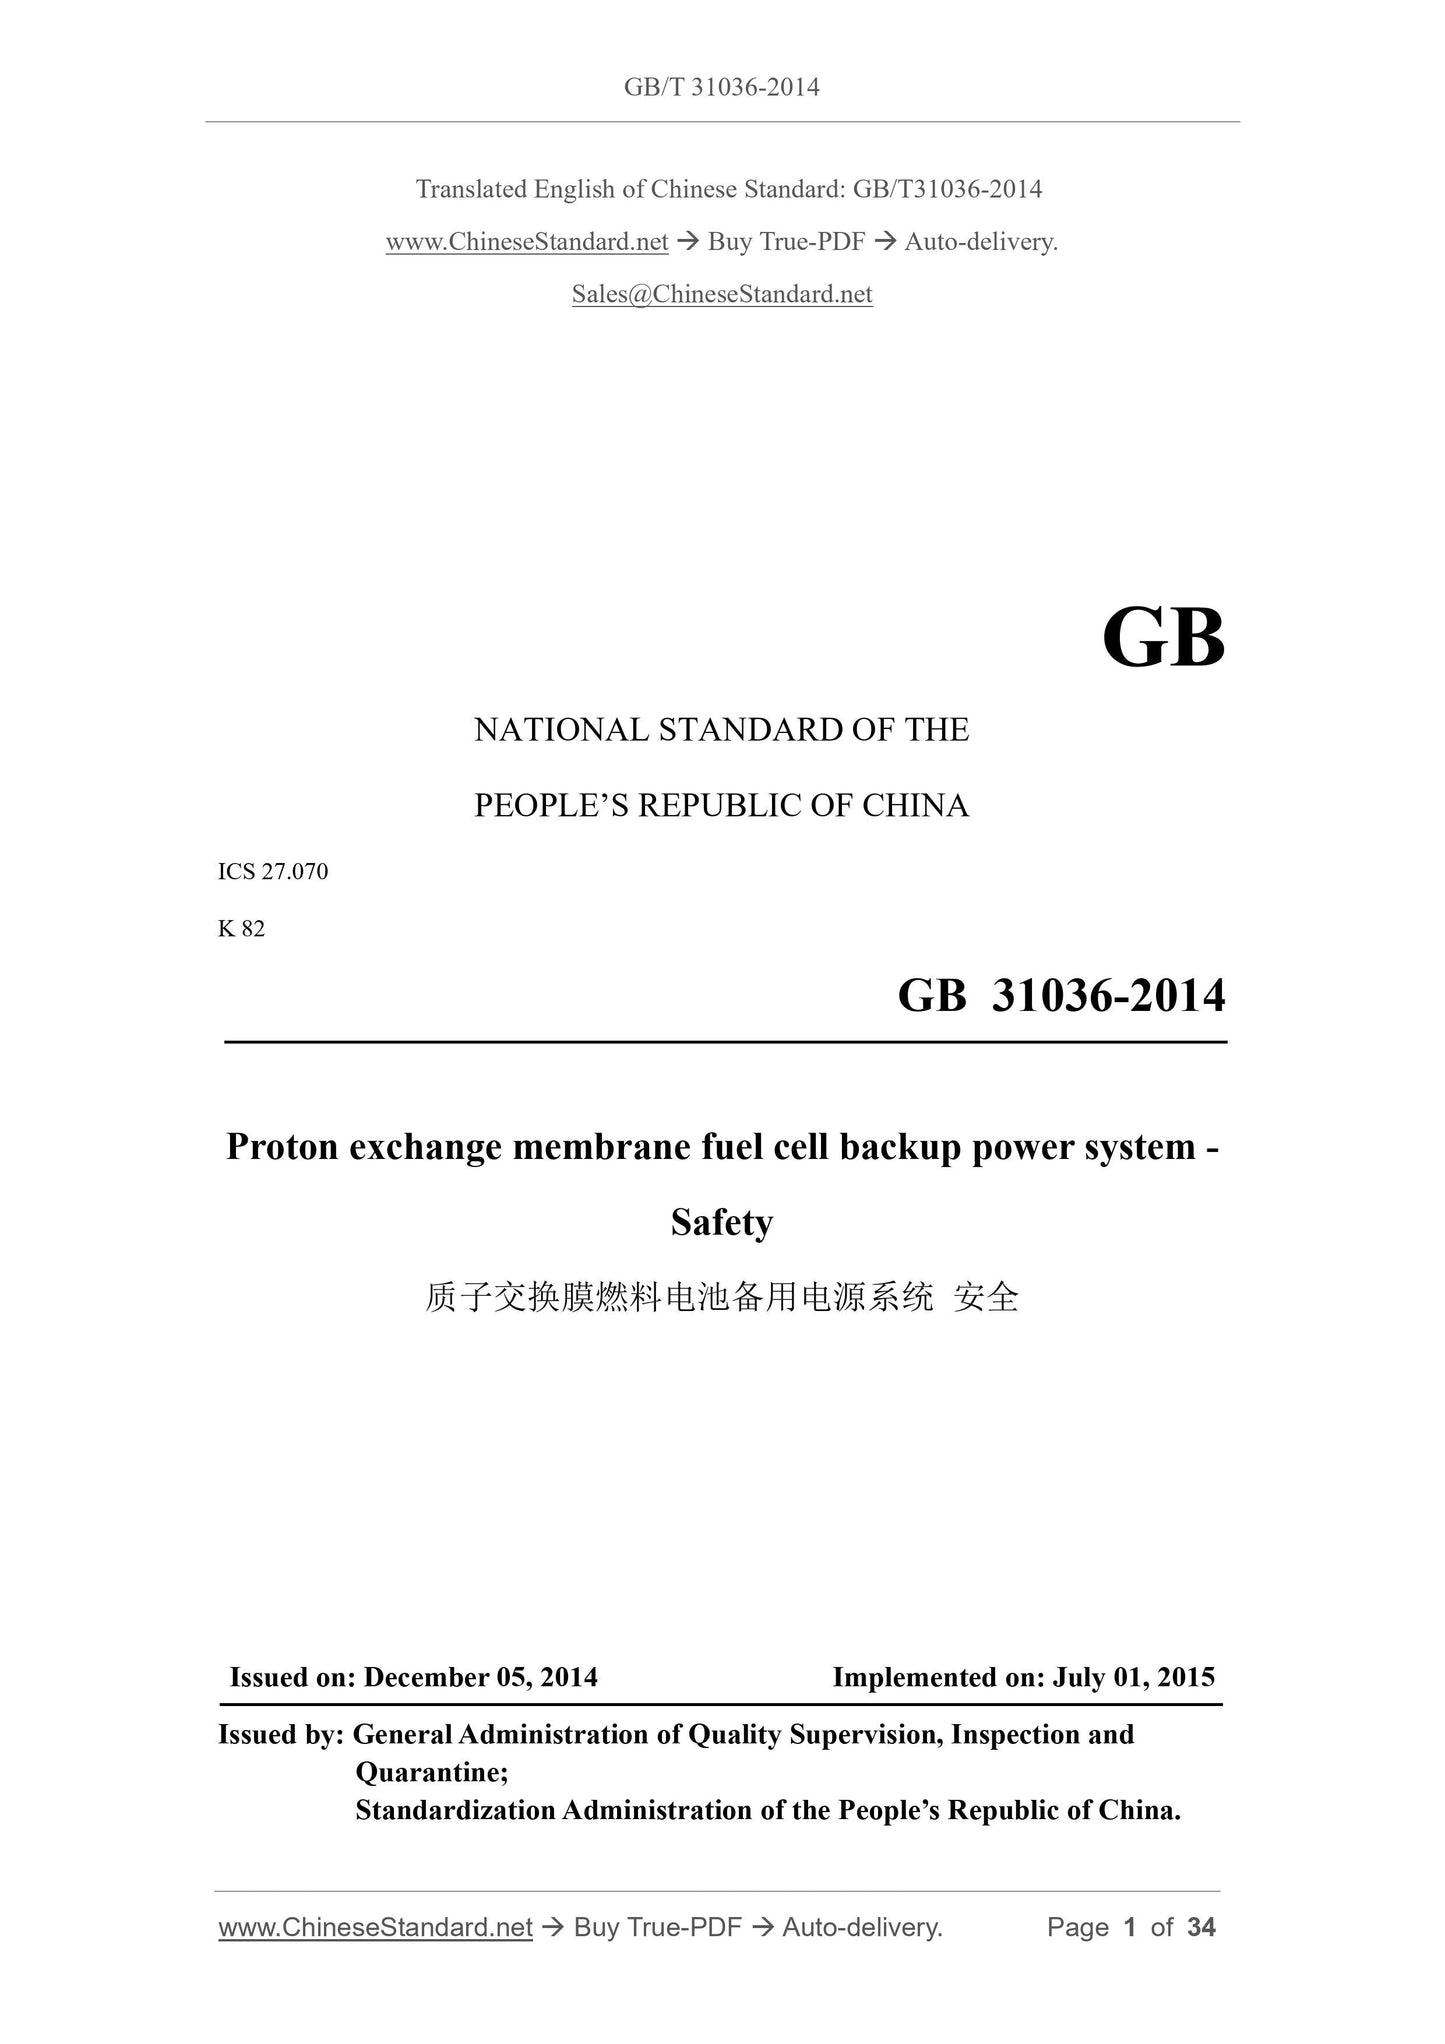 GB/T 31036-2014 Page 1